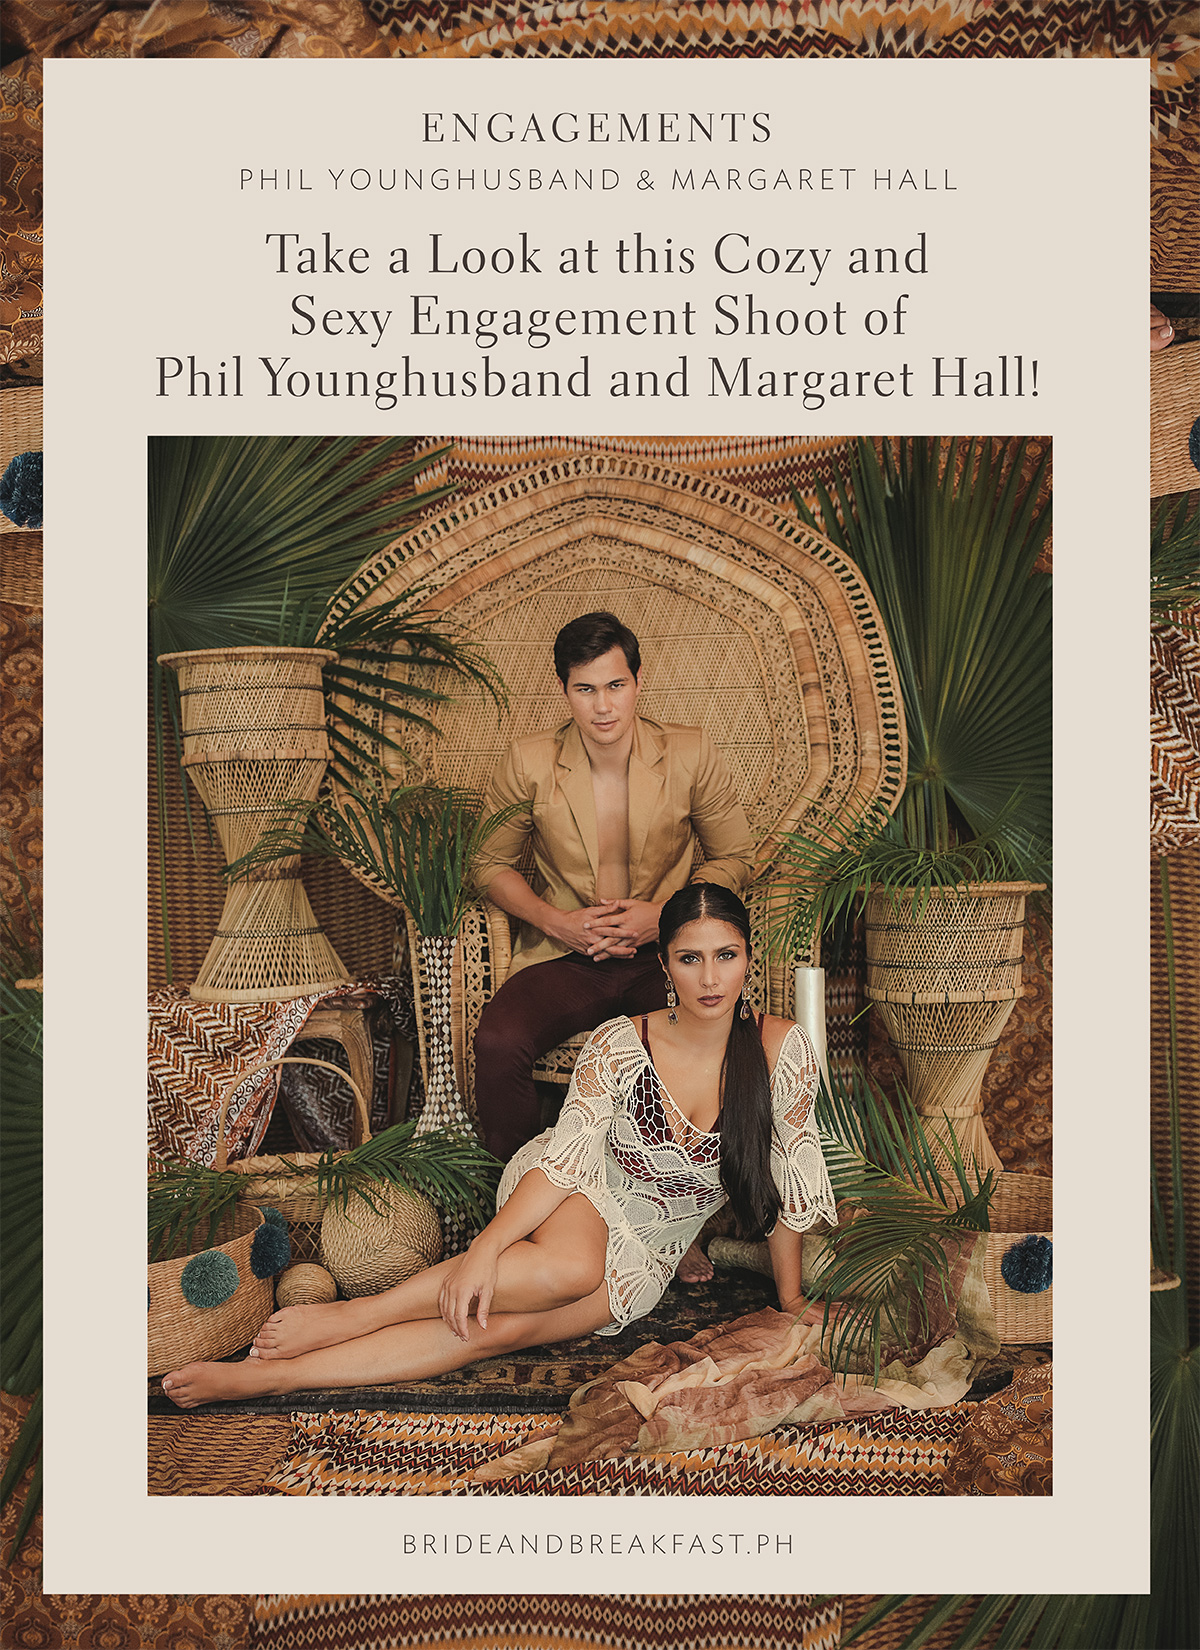 Take a Look at this Cozy and Sexy Engagement Shoot of Phil Younghusband and Margaret Hall!